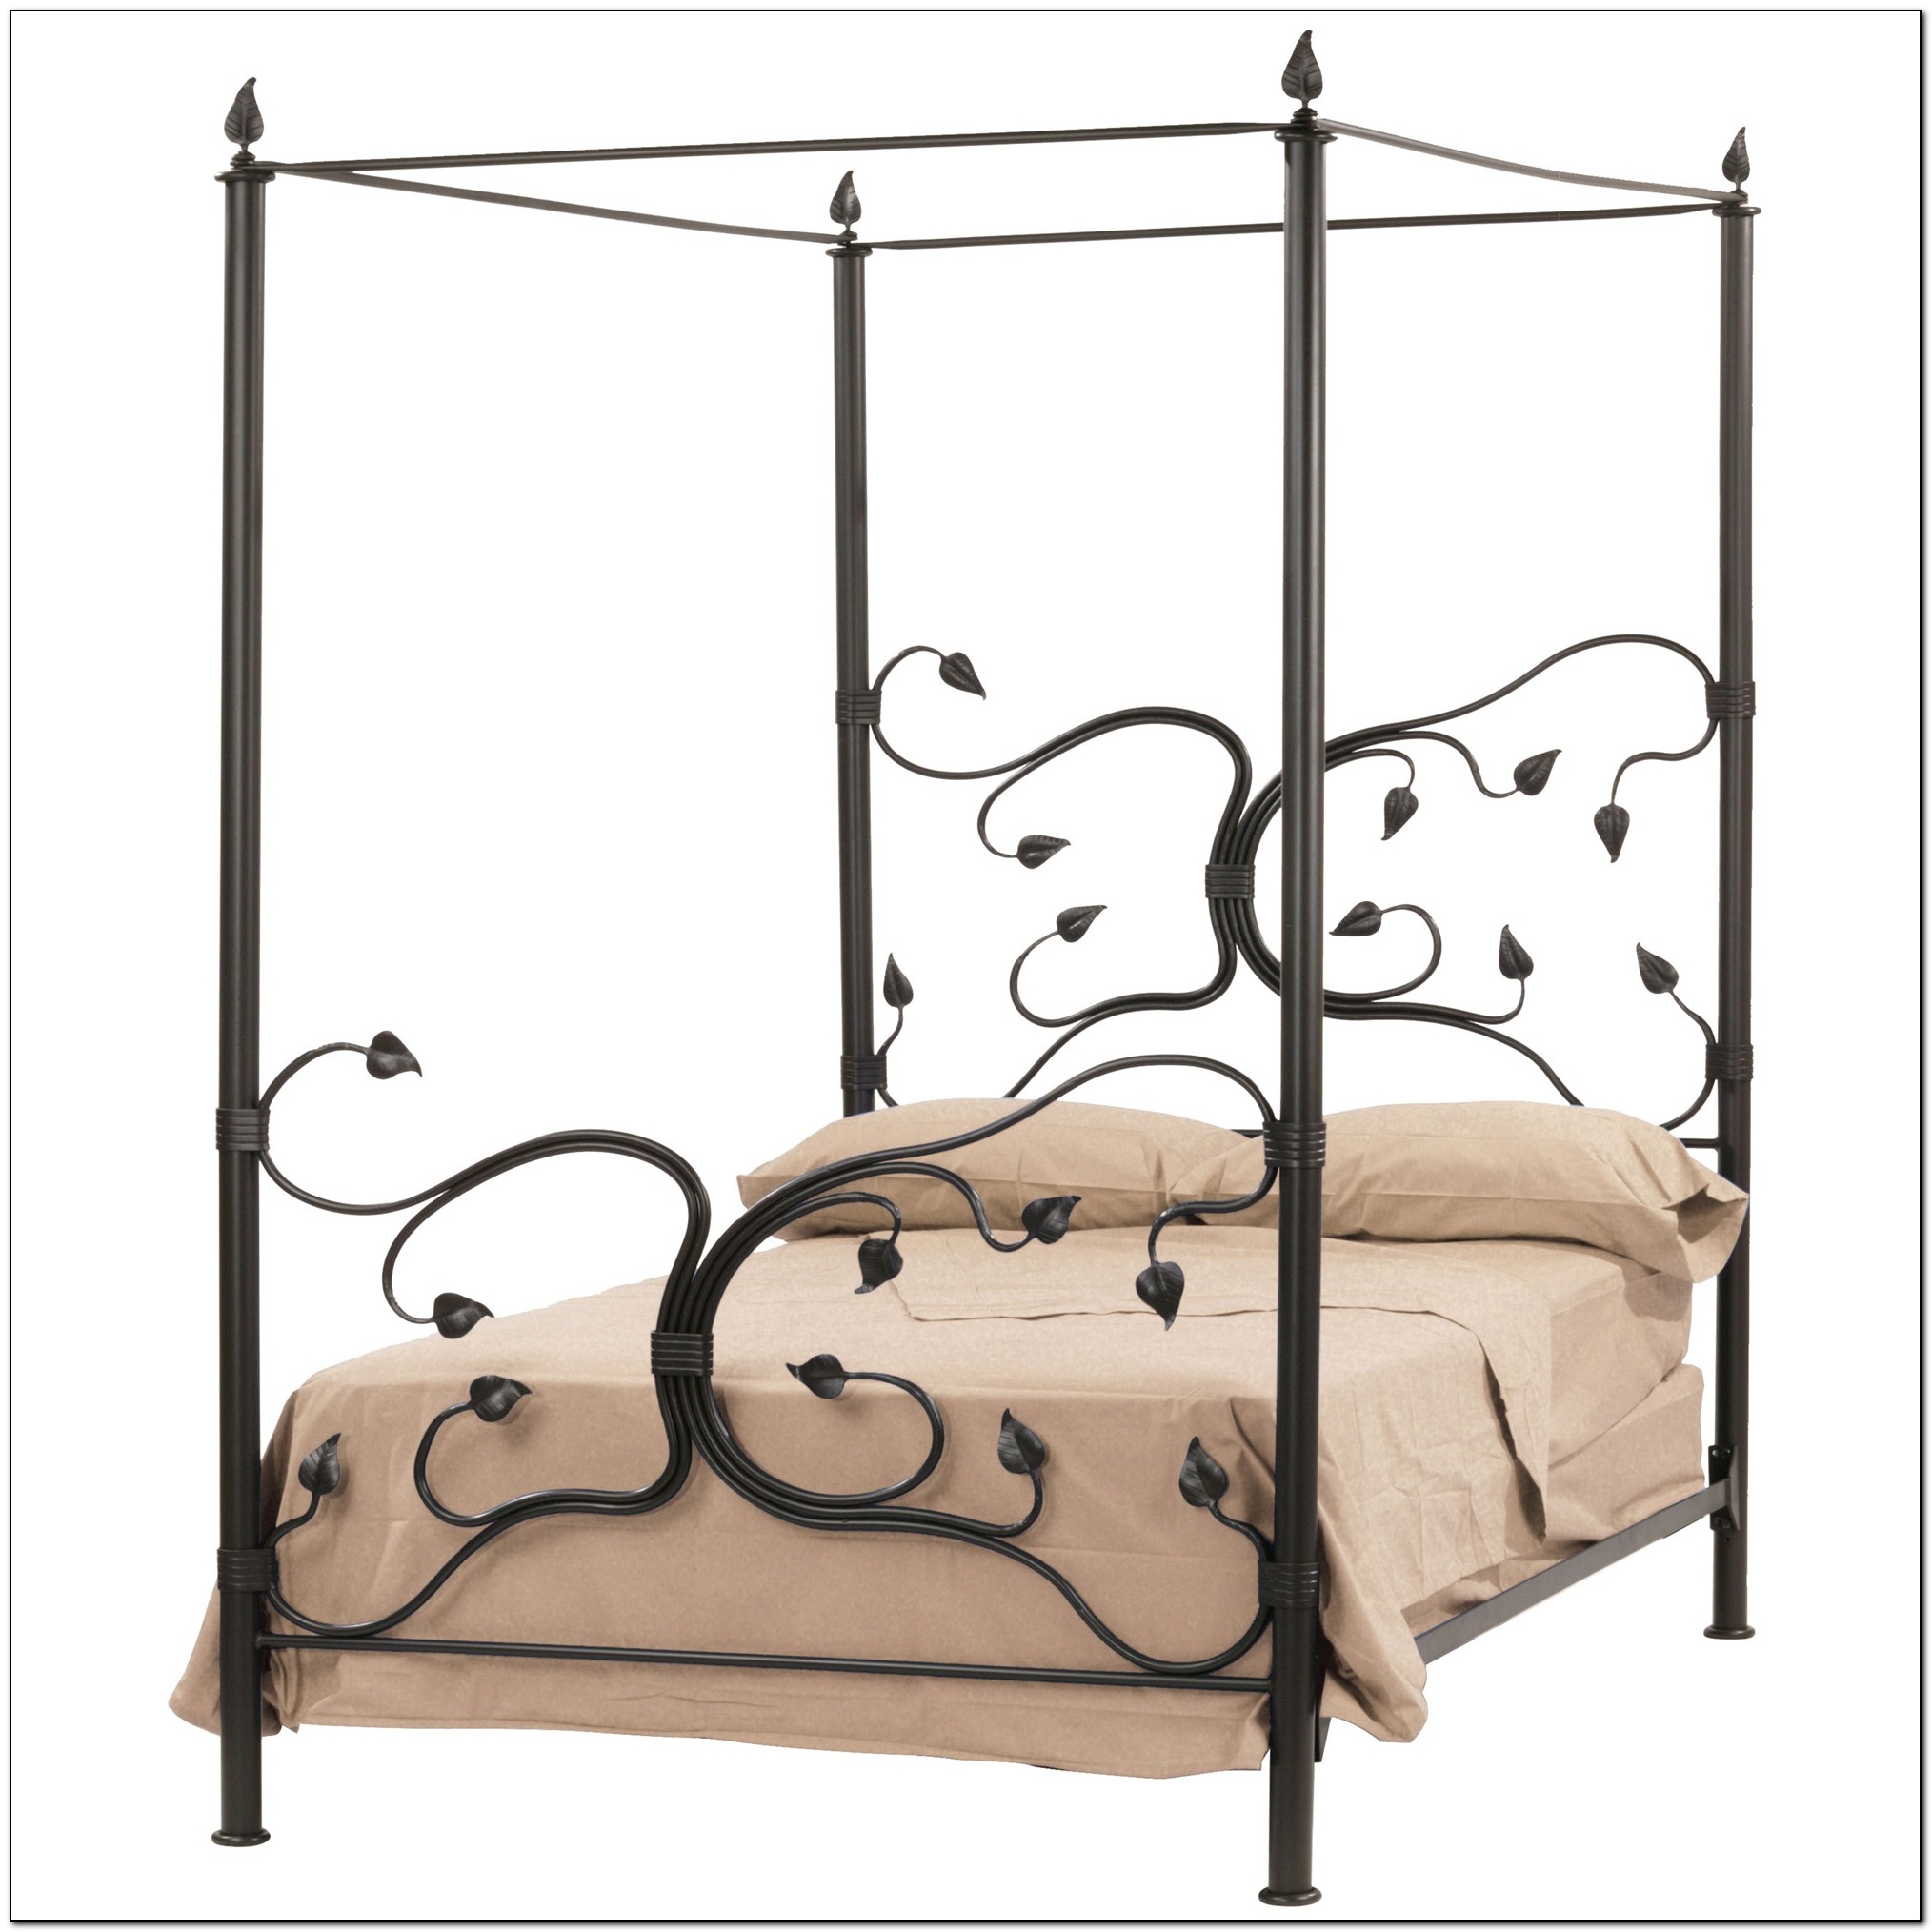 Wrought Iron Beds With Canopy